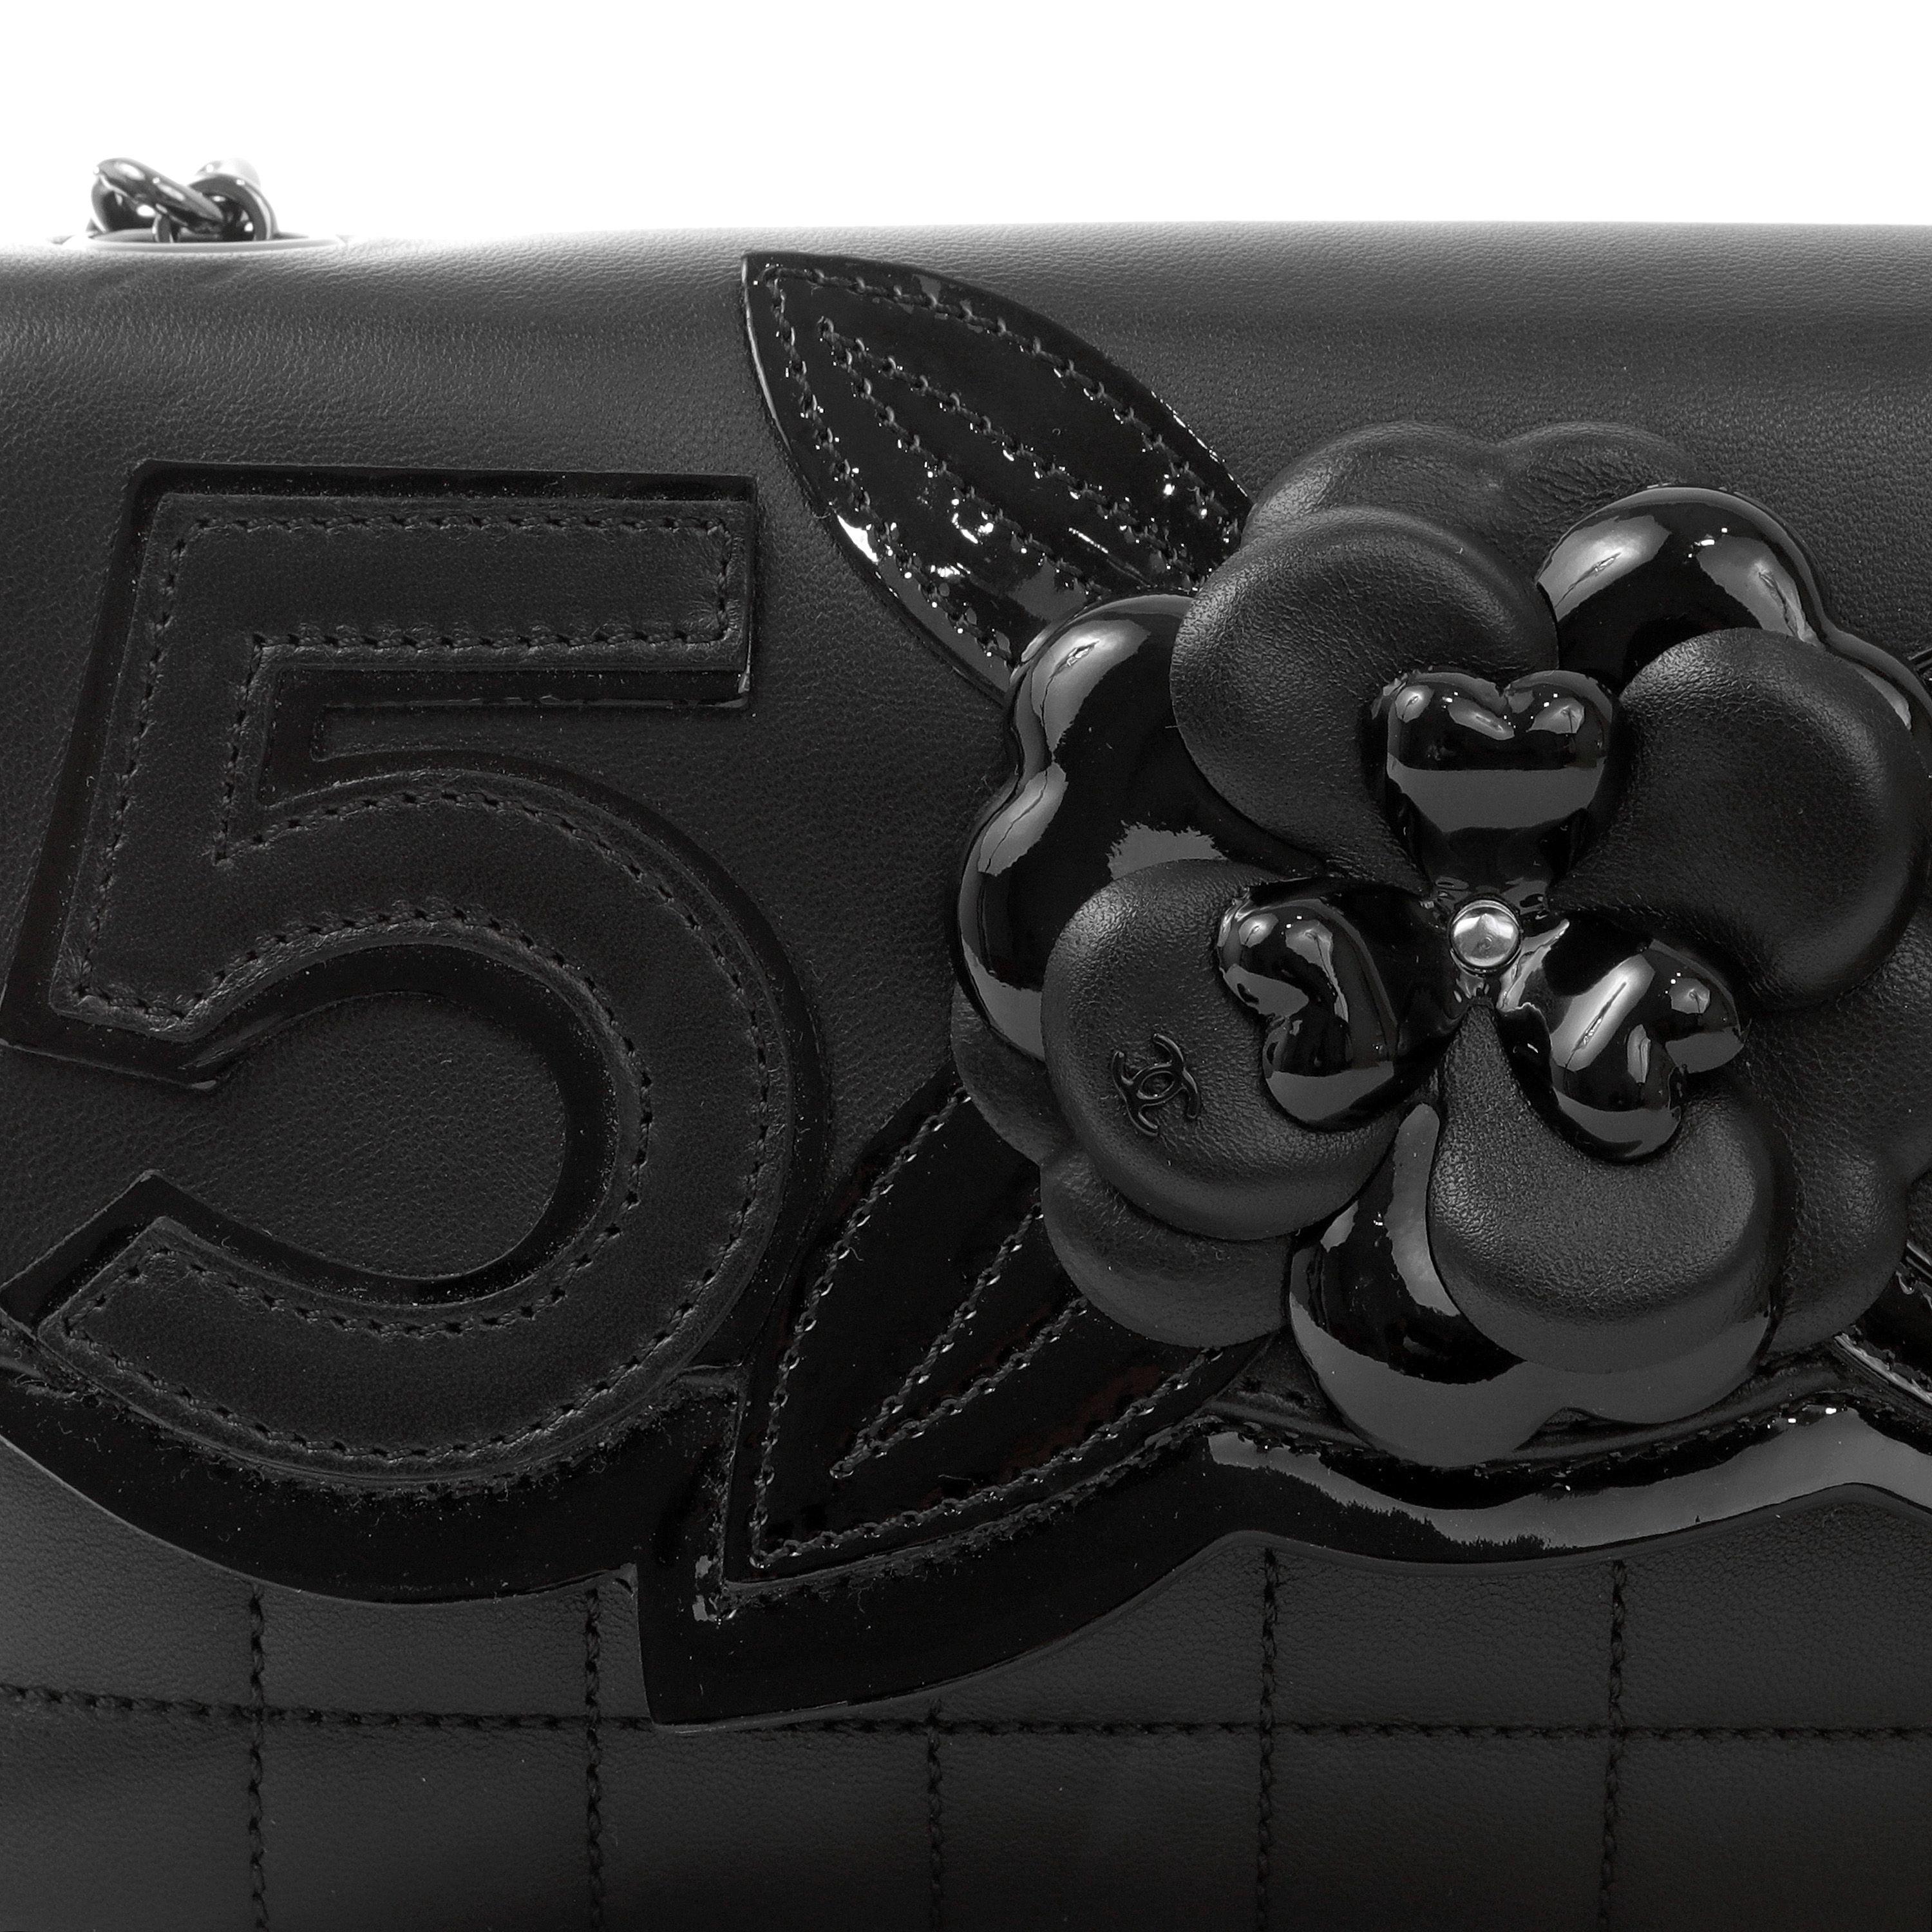 This authentic Chanel Black Lambskin Camellia Flap Clutch is pristine.  Supple black lambskin is stitched in chocolate bar pattern.  Iconic Chanel motifs are incorporated into the flap including the Camellia flower, numeral 5 and interlocking CC. 